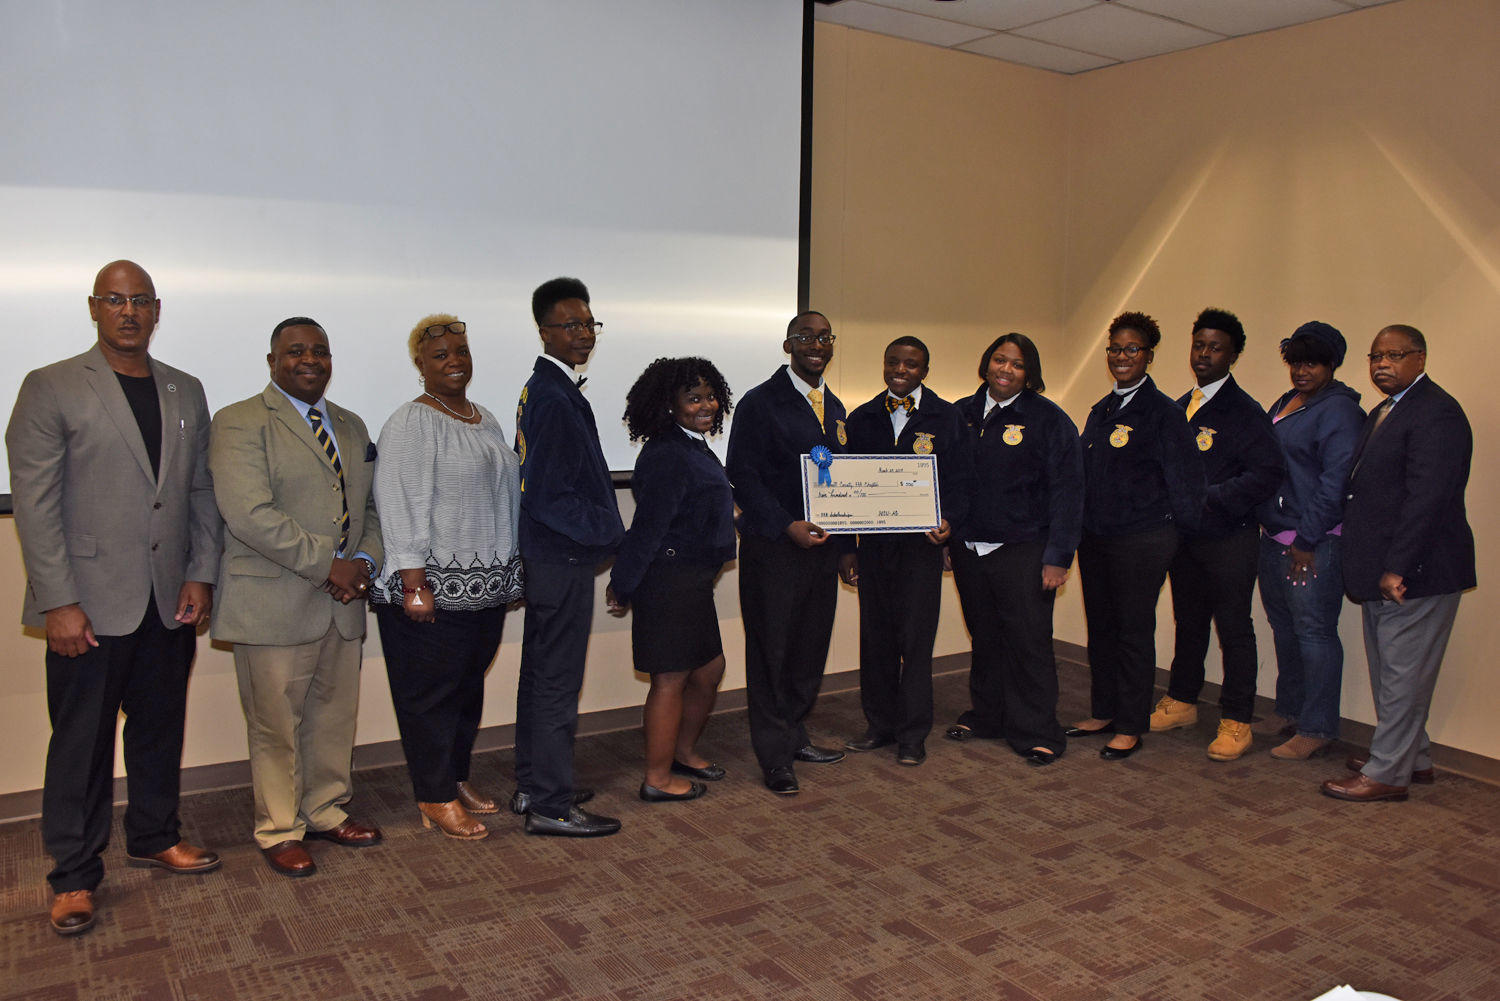 Charlie Grace (far left), FVSU Dougherty County Extension agent along with FVSU Terrell County Extension agent Atonya Jordan (second from right) and Dr. Mark Latimore Jr. (far right), FVSU Extension Administrator, present the Terrell County High School FF